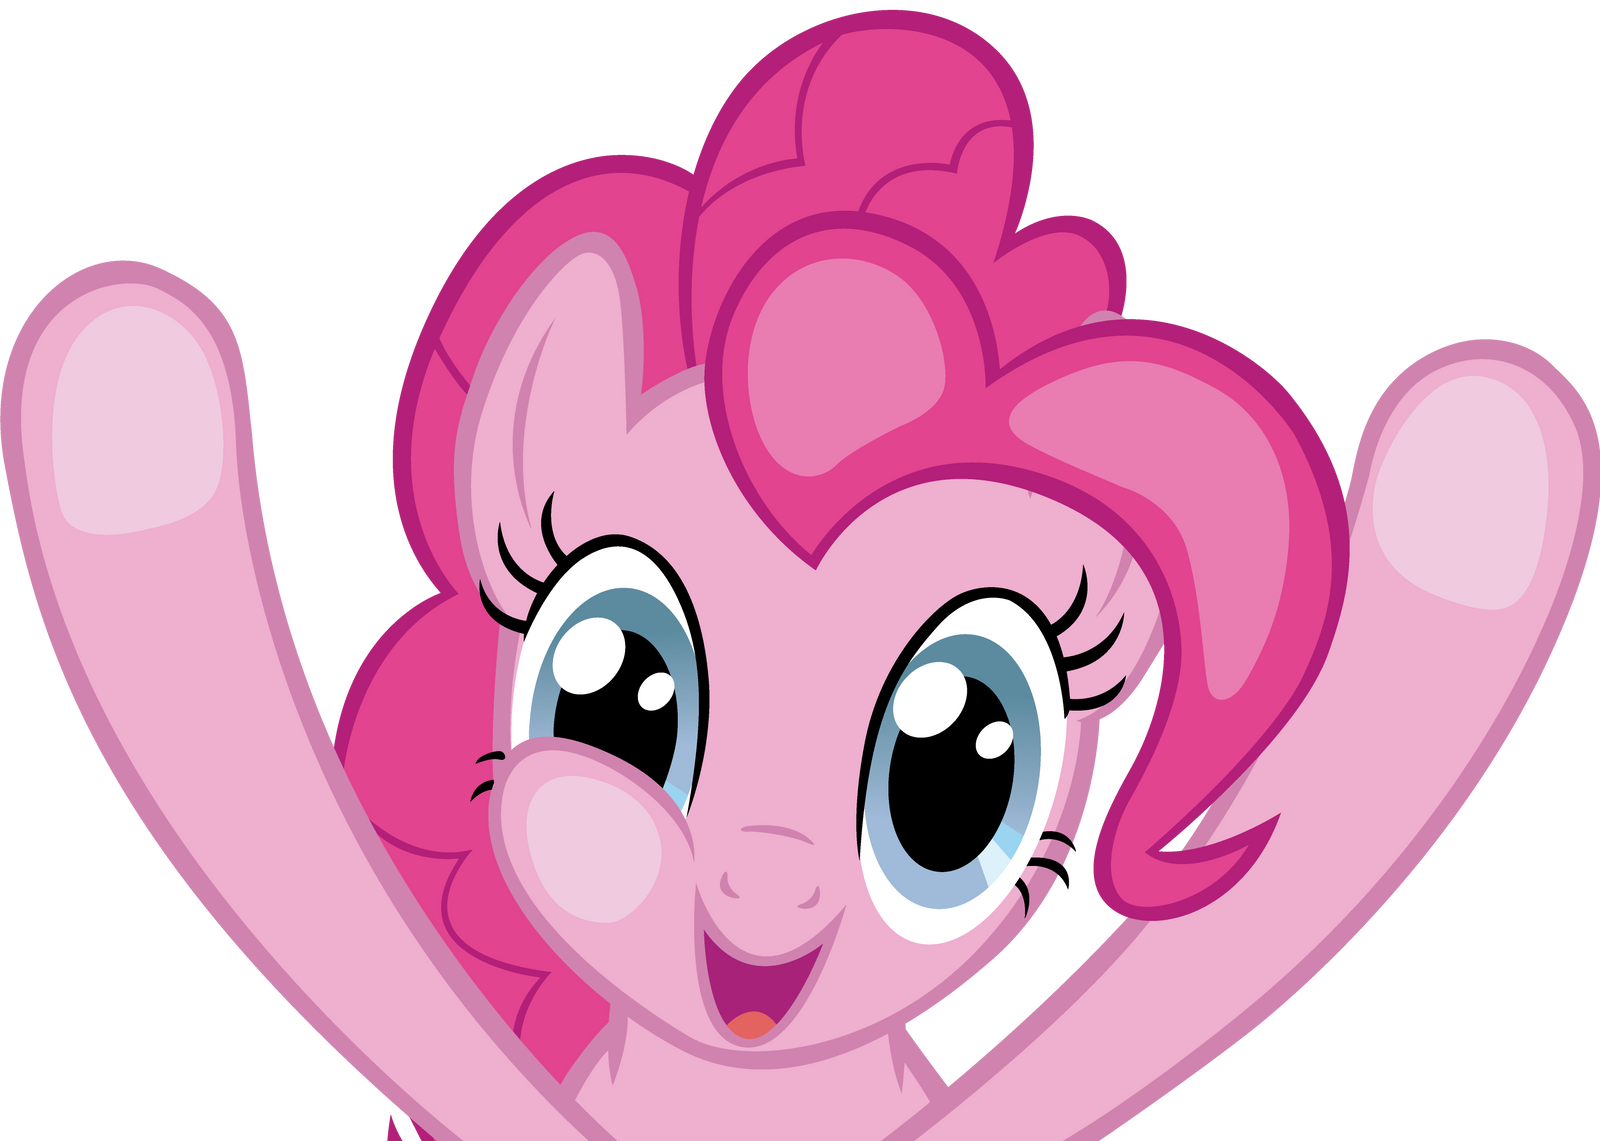 pinkie_pie___4th_wall_by_cptofthefriendship-d4mdrlt.png